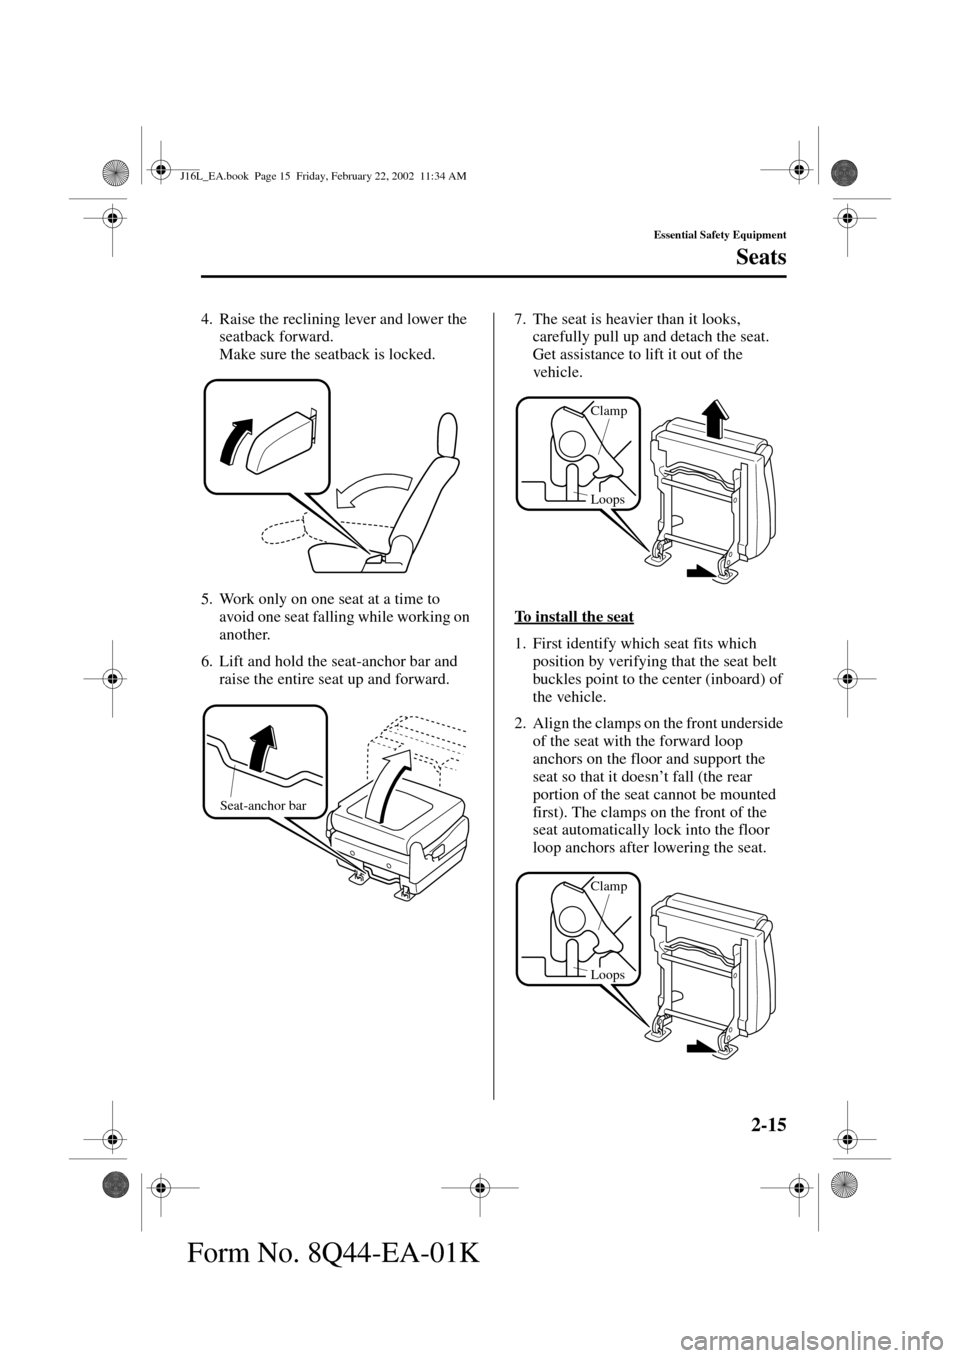 MAZDA MODEL MPV 2002   (in English) Owners Manual 2-15
Essential Safety Equipment
Seats
Form No. 8Q44-EA-01K
4. Raise the reclining lever and lower the 
seatback forward.
Make sure the seatback is locked.
5. Work only on one seat at a time to 
avoid 